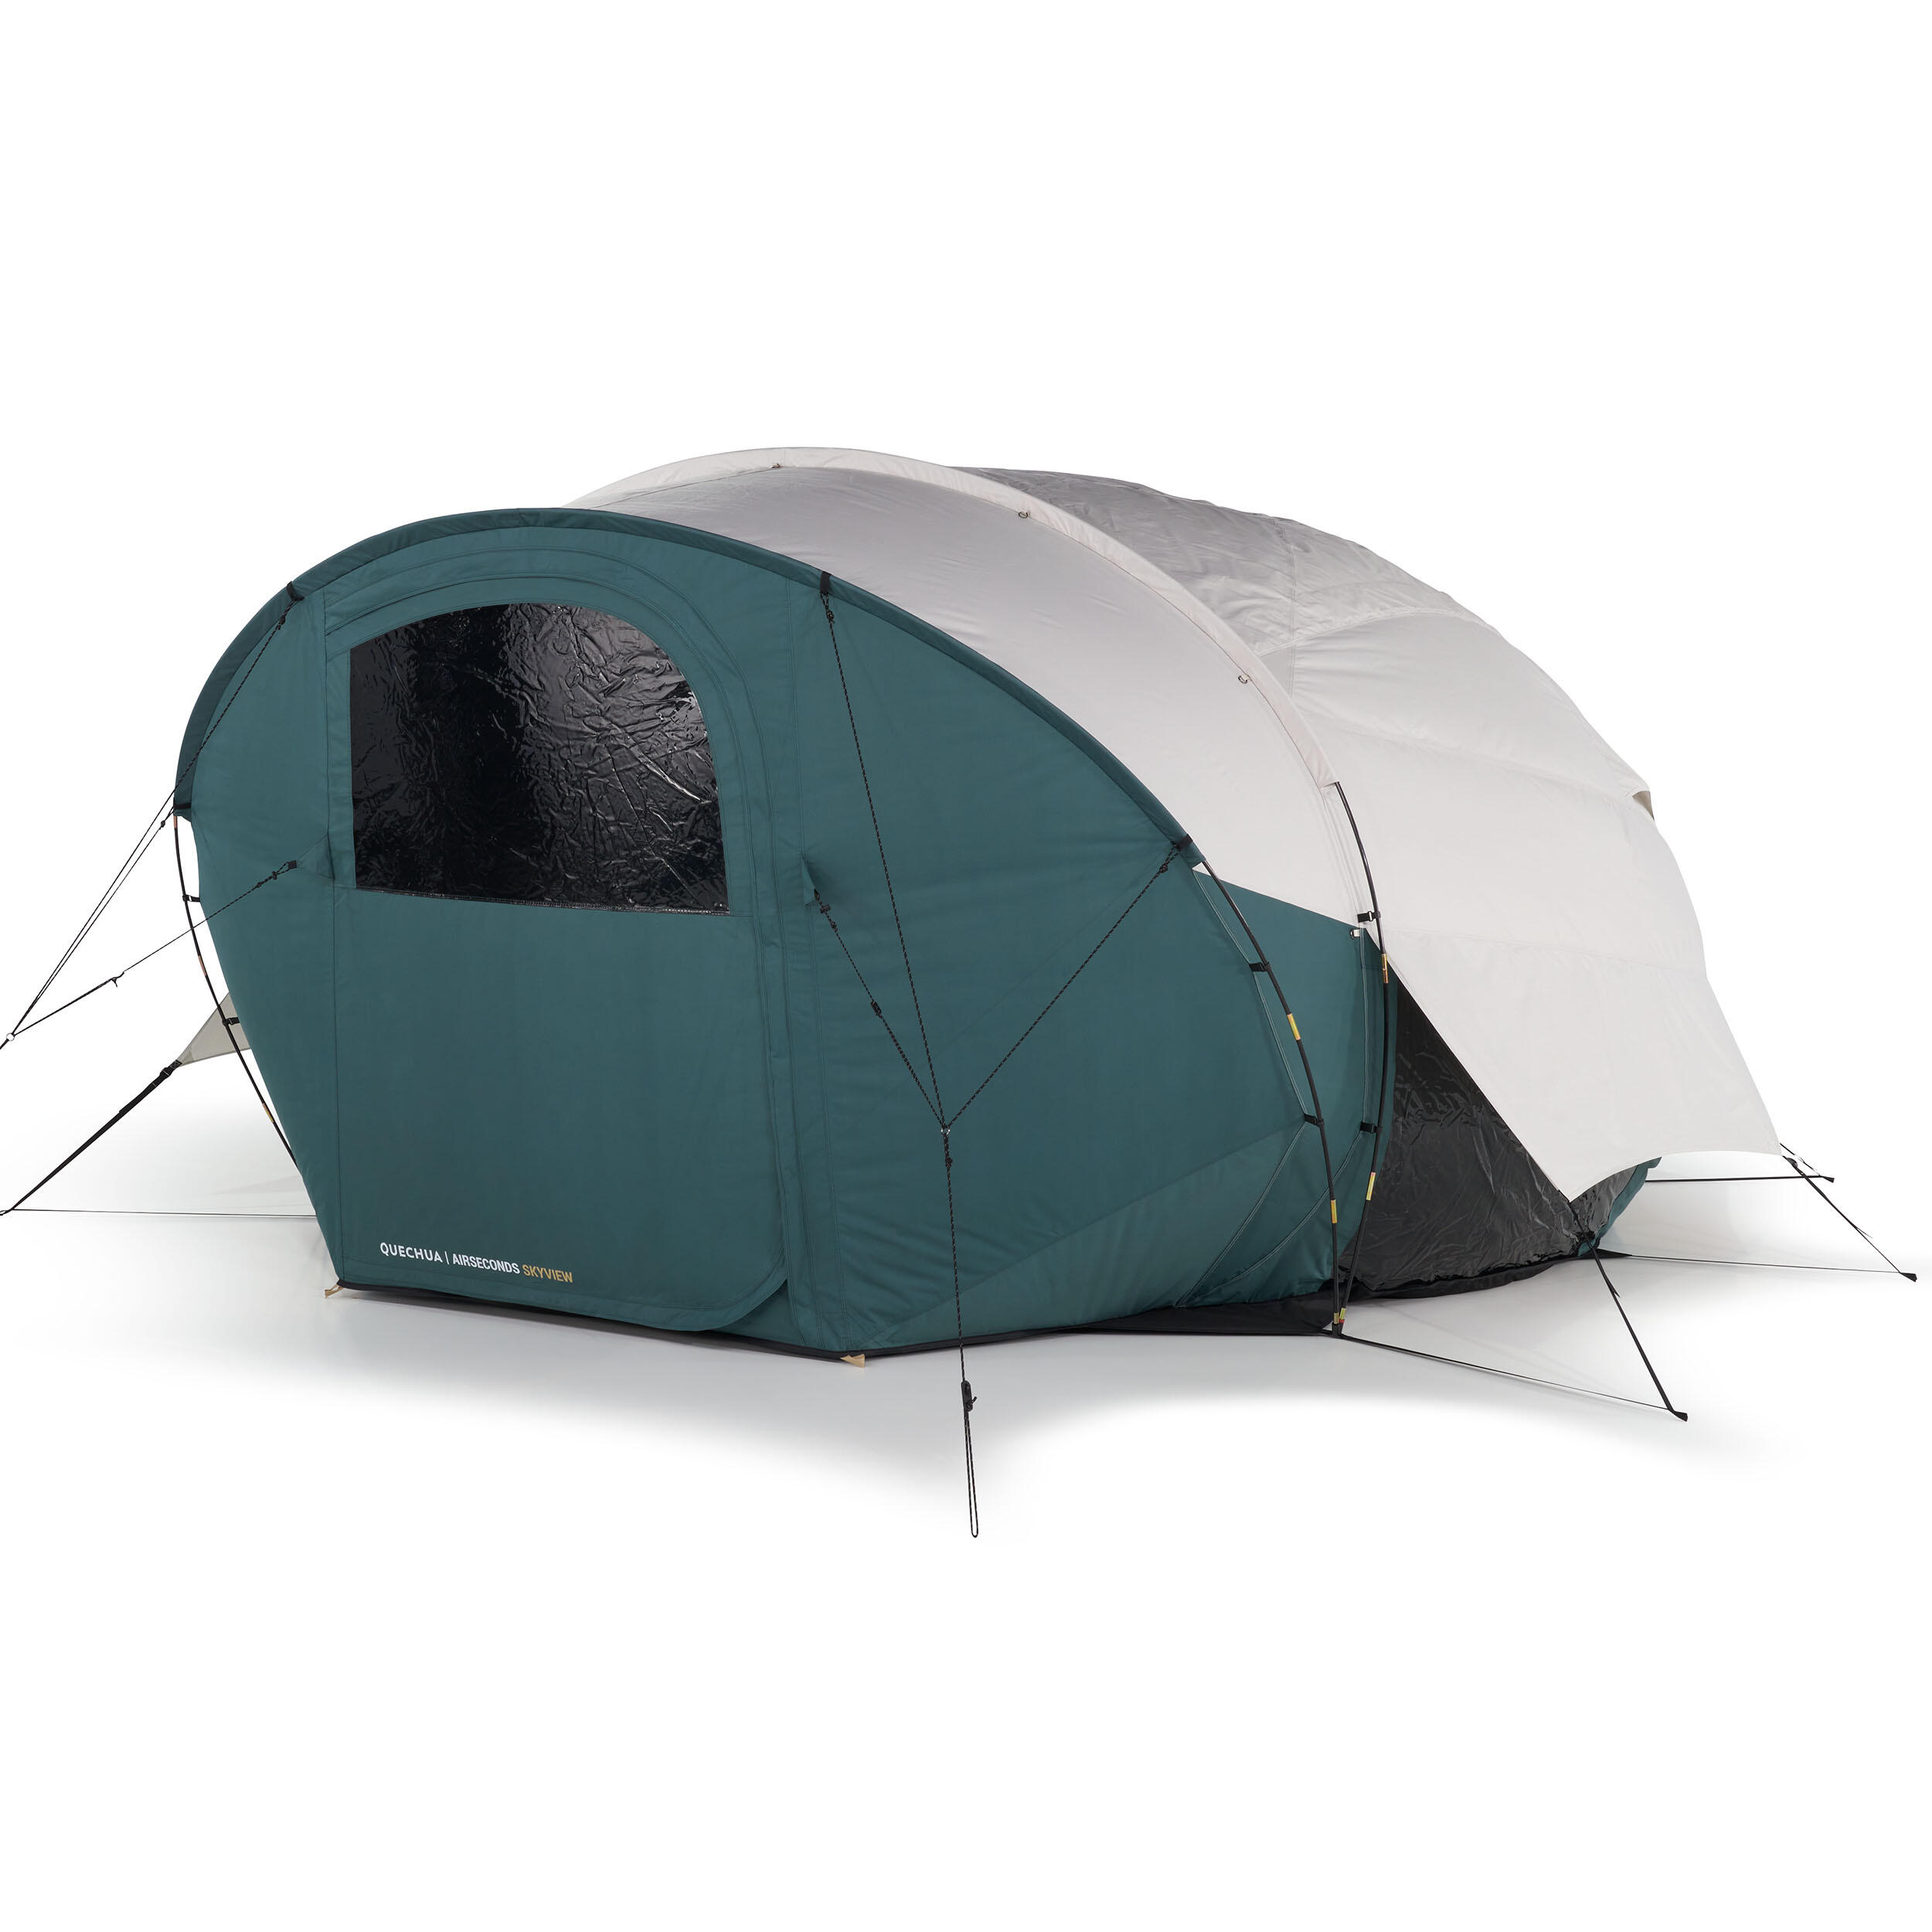 Tunneltält Camping - Air Seconds Skyview Polycotton - 2 Personer - 1 Sovutrymme